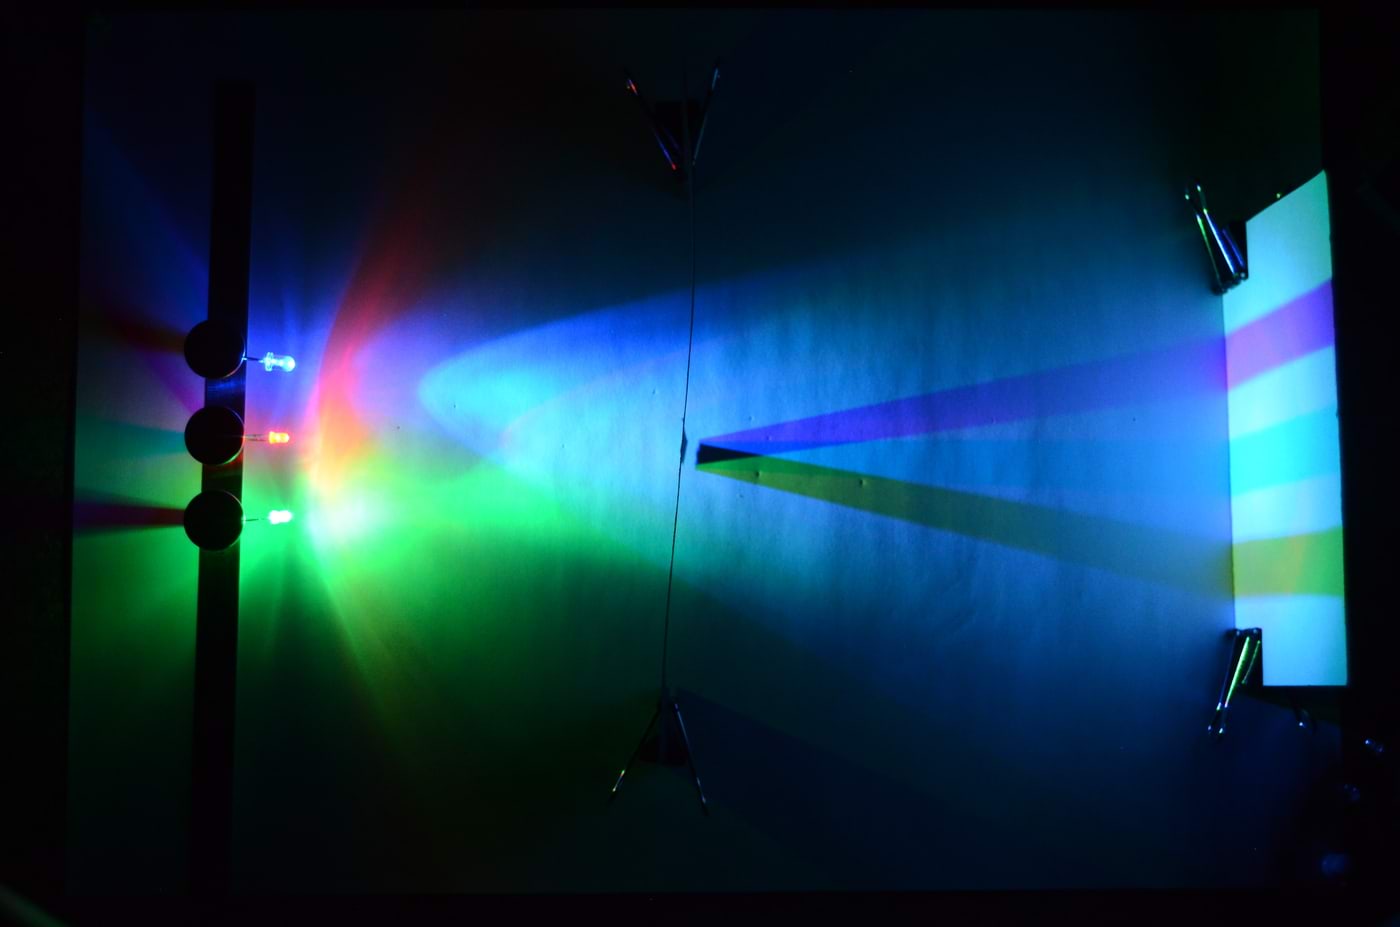 Blue, red, and green LEDs, shadows cast by the object, yellow, magenta, and cyan regions appear on the surface.